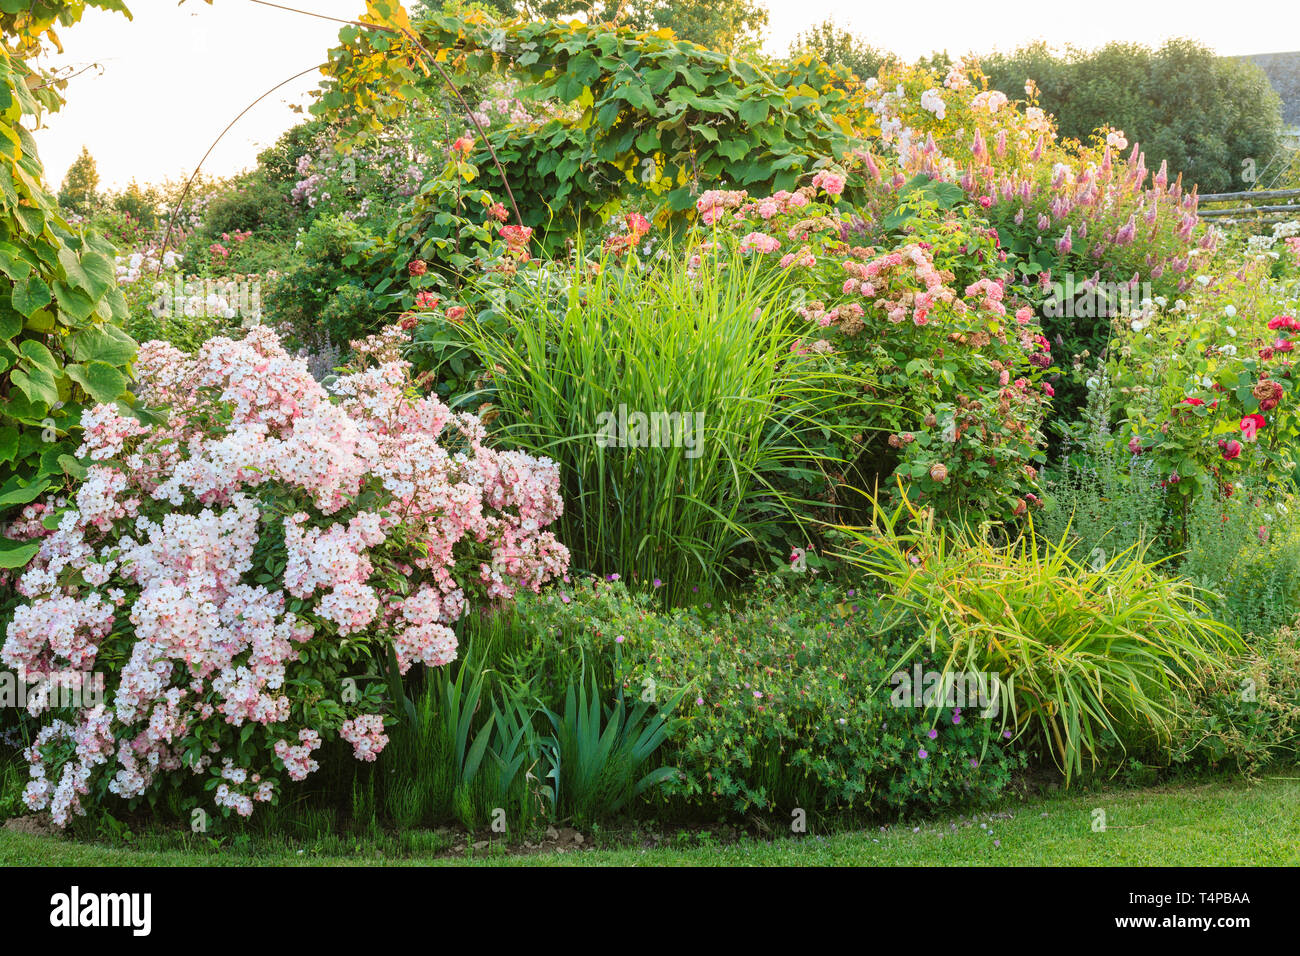 Roquelin’s gardens, Les jardins de Roquelin, France : flowerbed with perennial plants (obligatory mention of the garden name and editorial only) Stock Photo